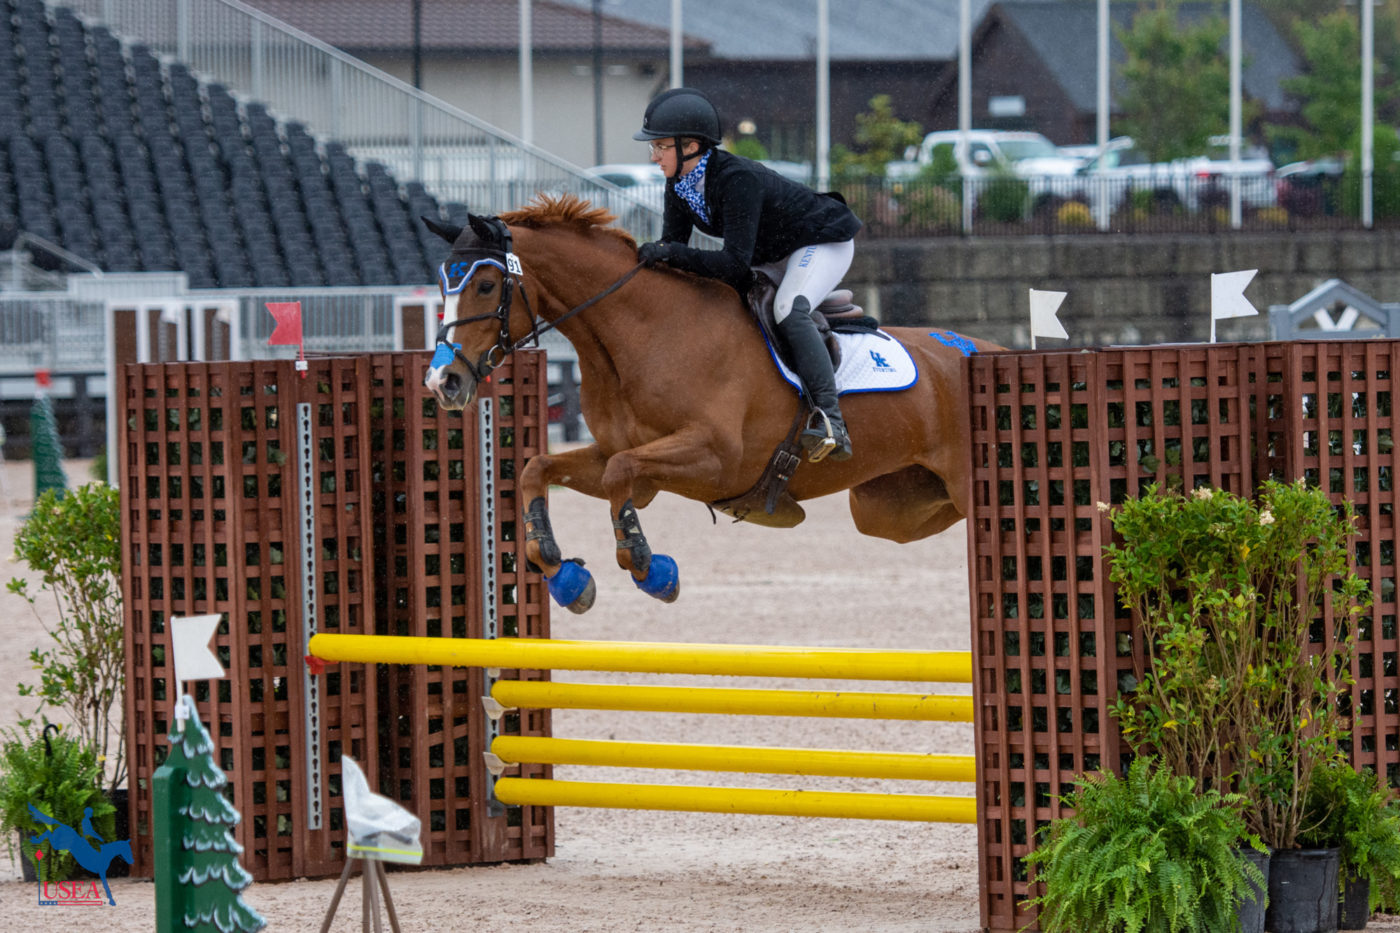 Claire Gamlin and Alohomora rode for UK. USEA/Shelby Allen photo